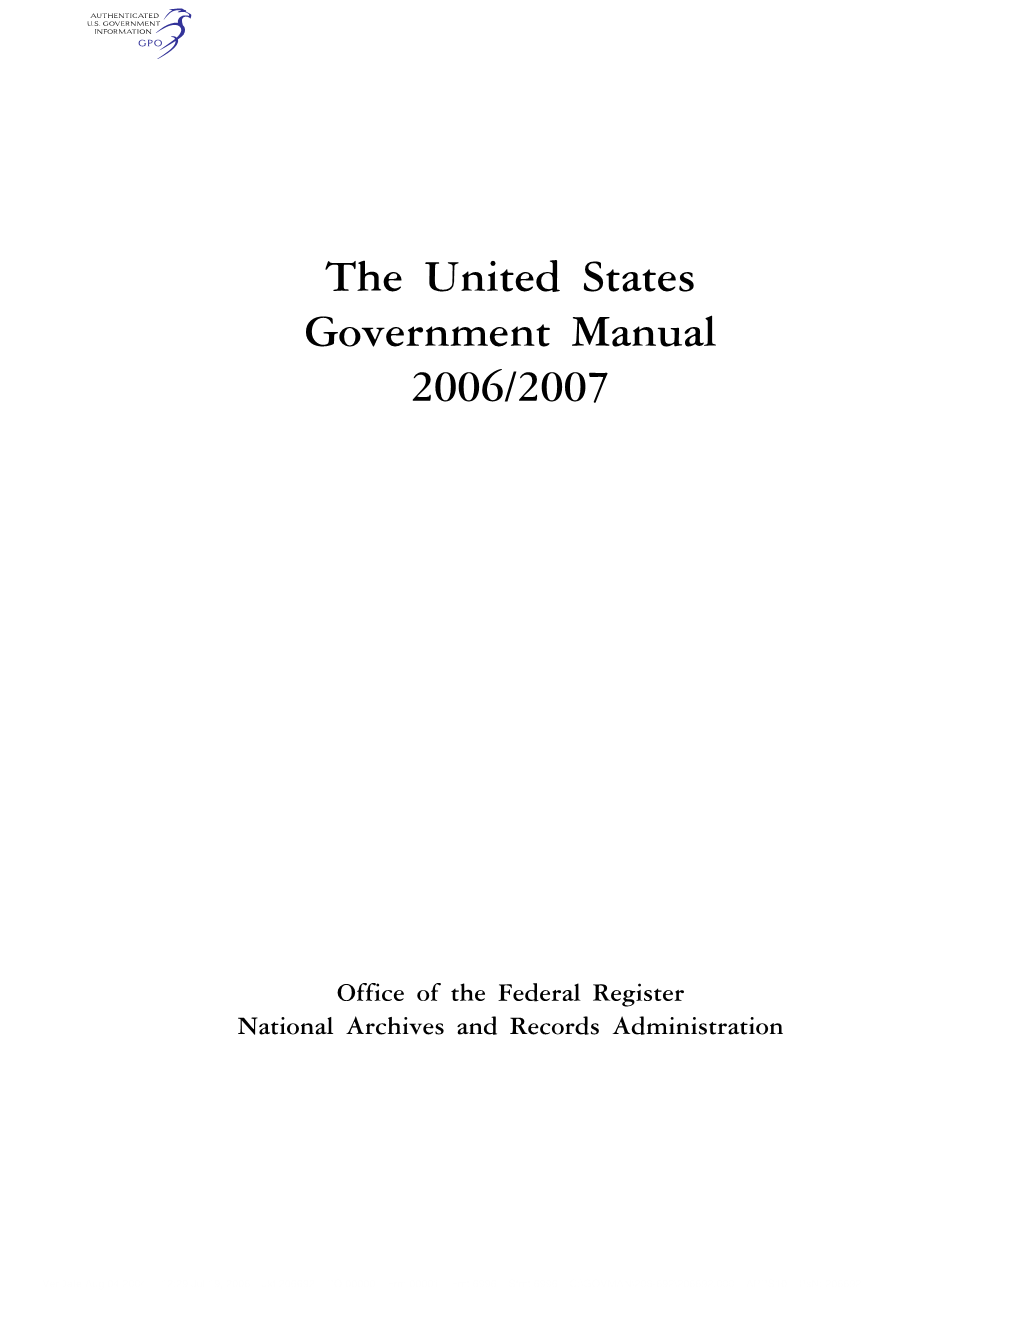 The United States Government Manual 2006/2007